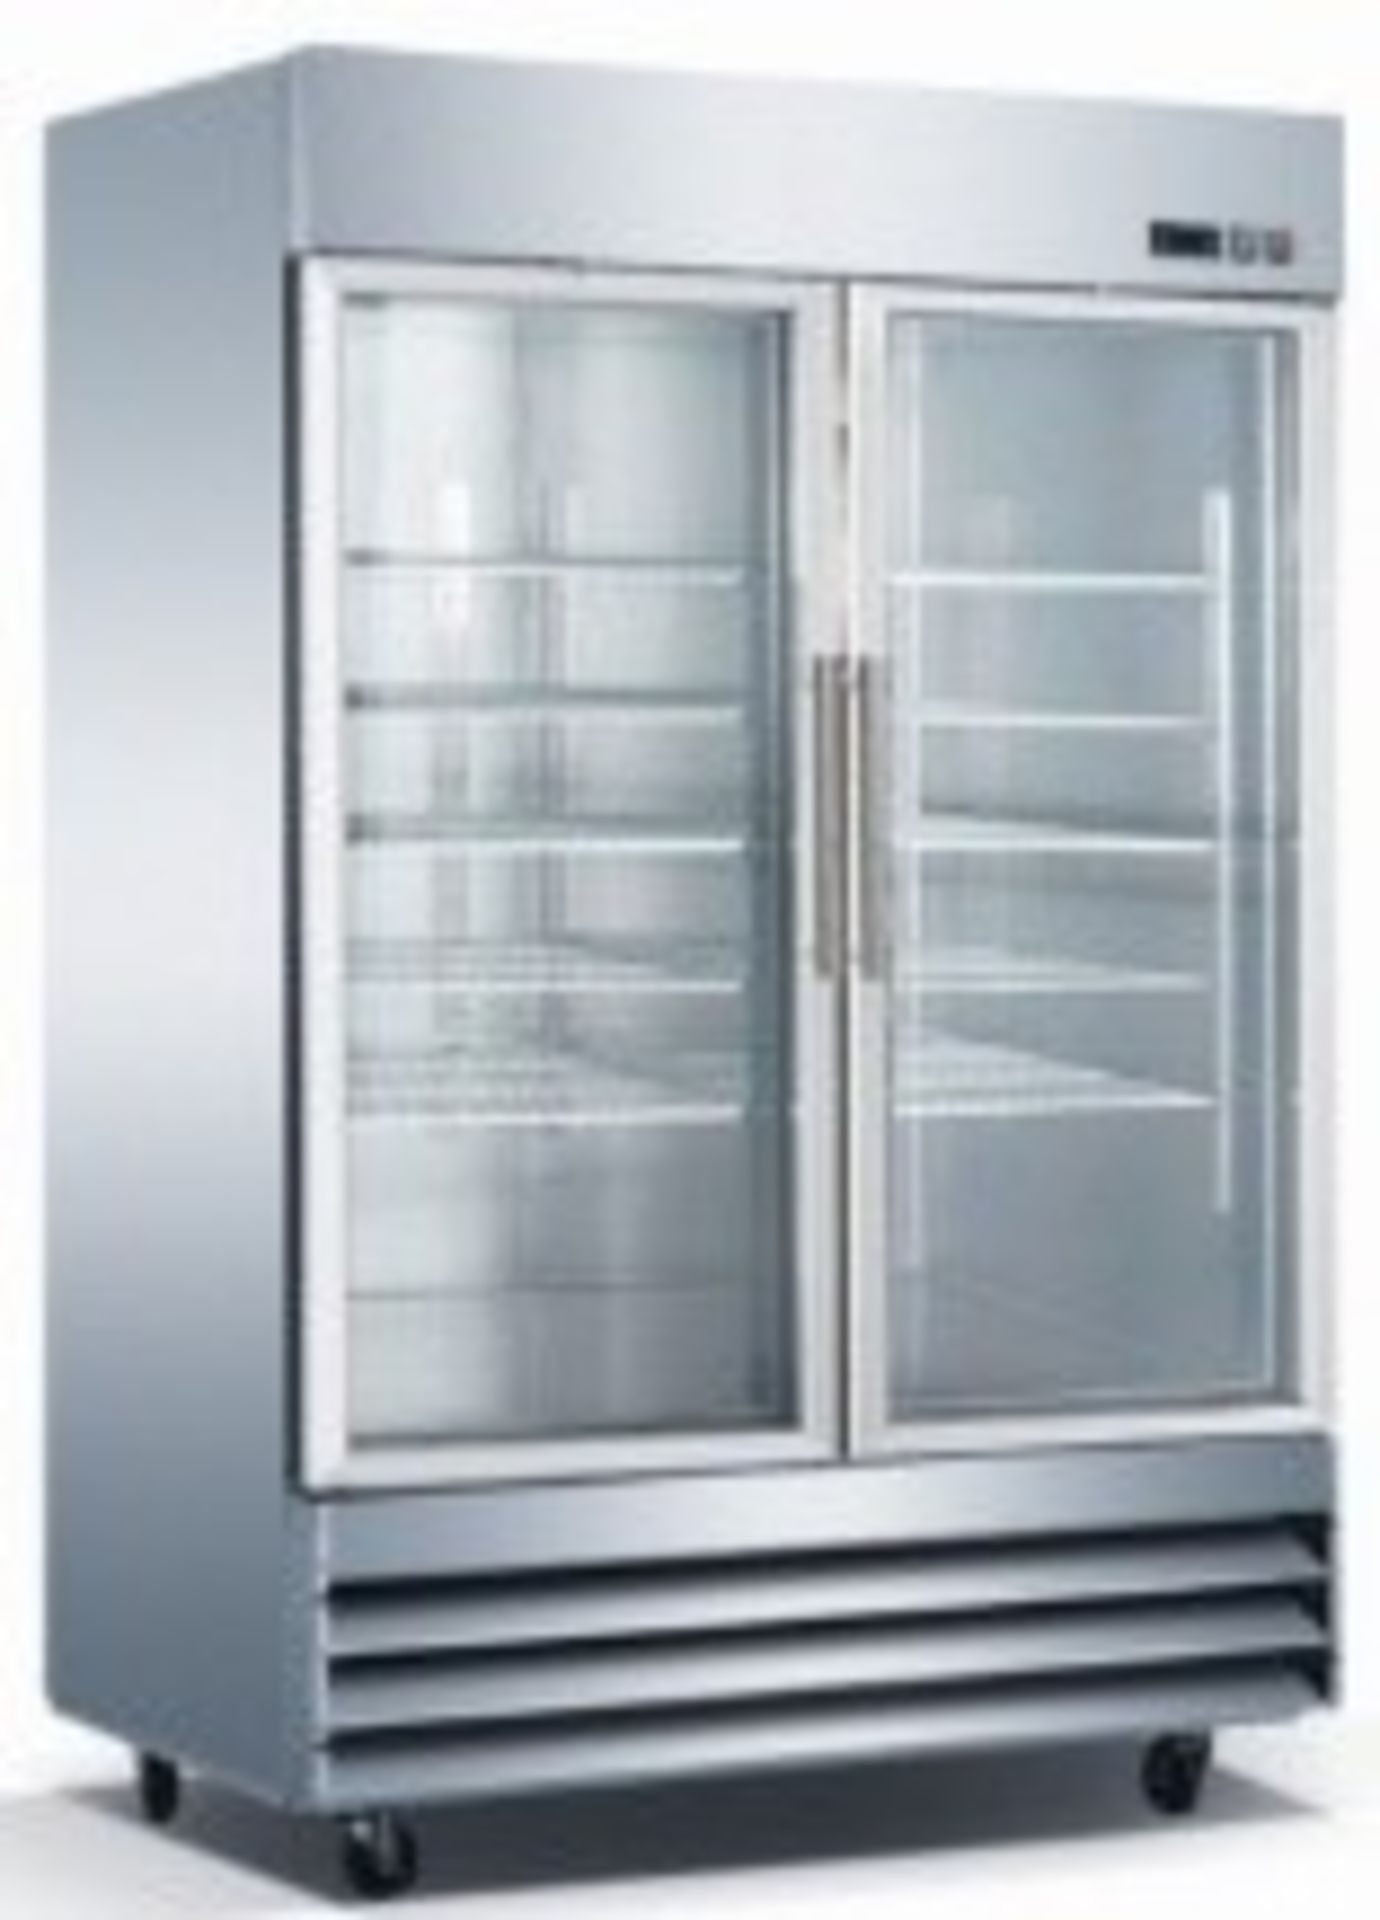 EQ Stainless Steel Reach-In Refrigerator 349 Gal, Silver Model #:CFD-2RR-GEHC L*W*H  (inch):54*32.